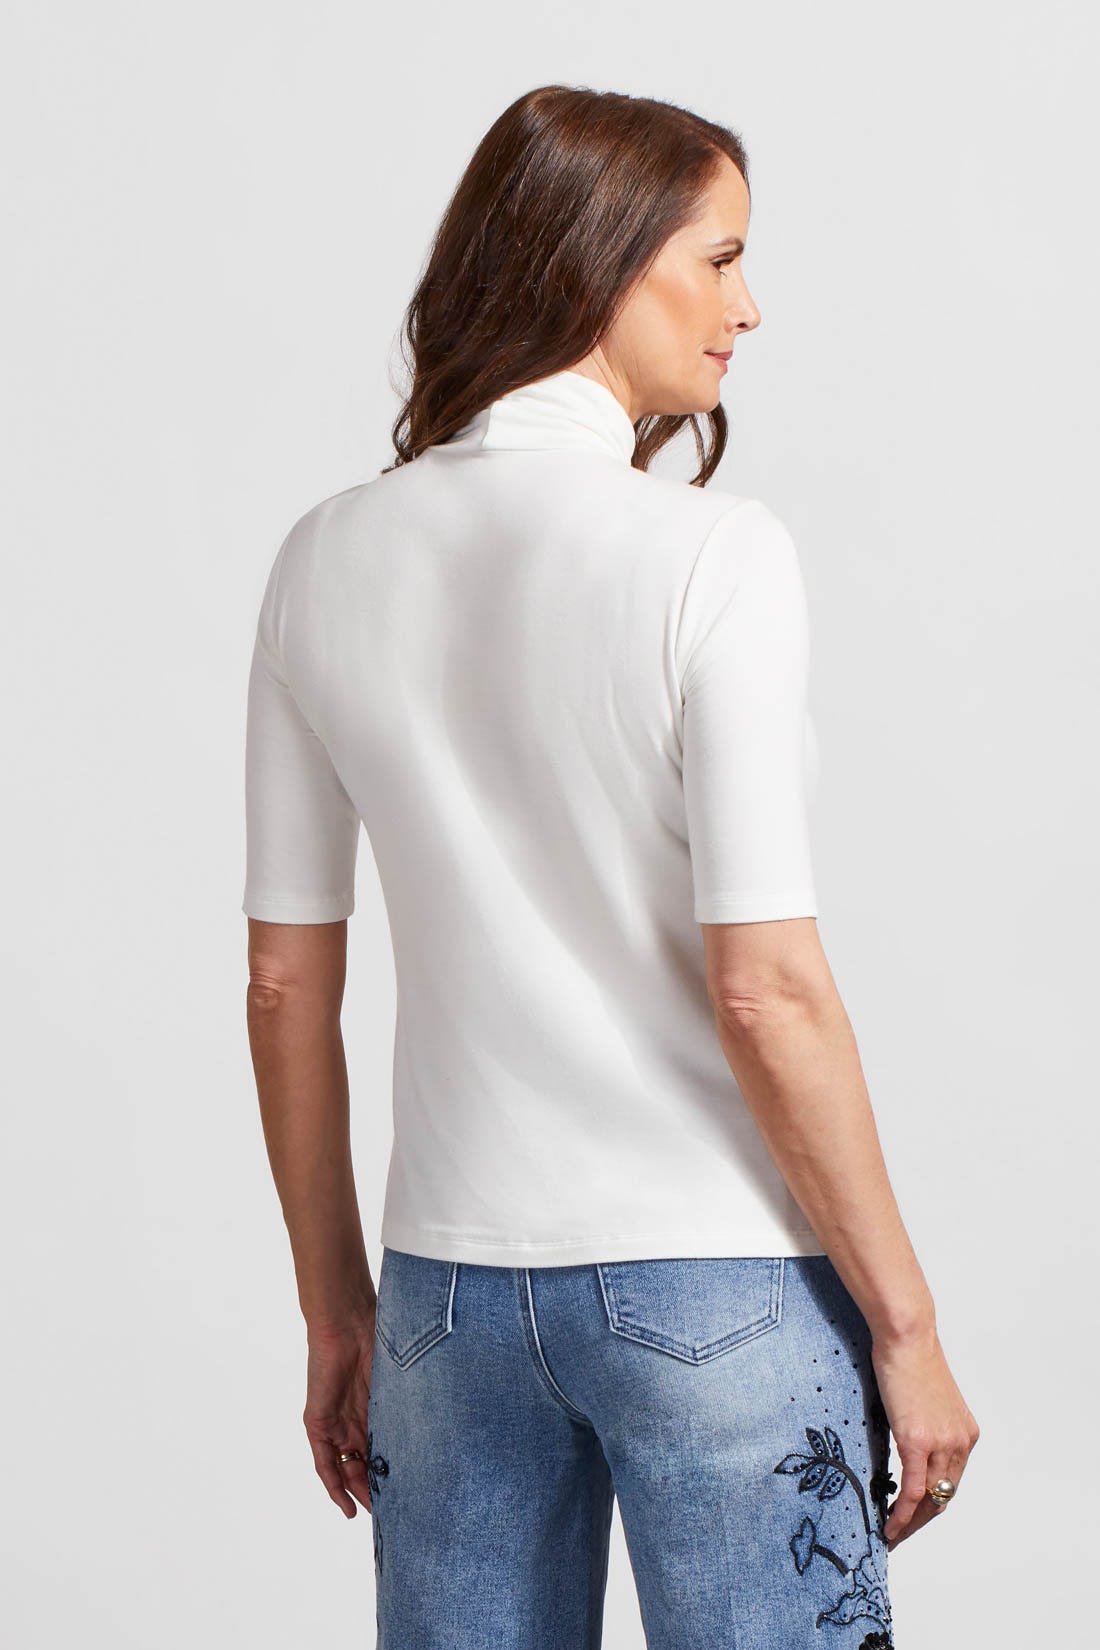 Mock Neck Elbow Sleeve Top - TWO COLORS AVAILABLE